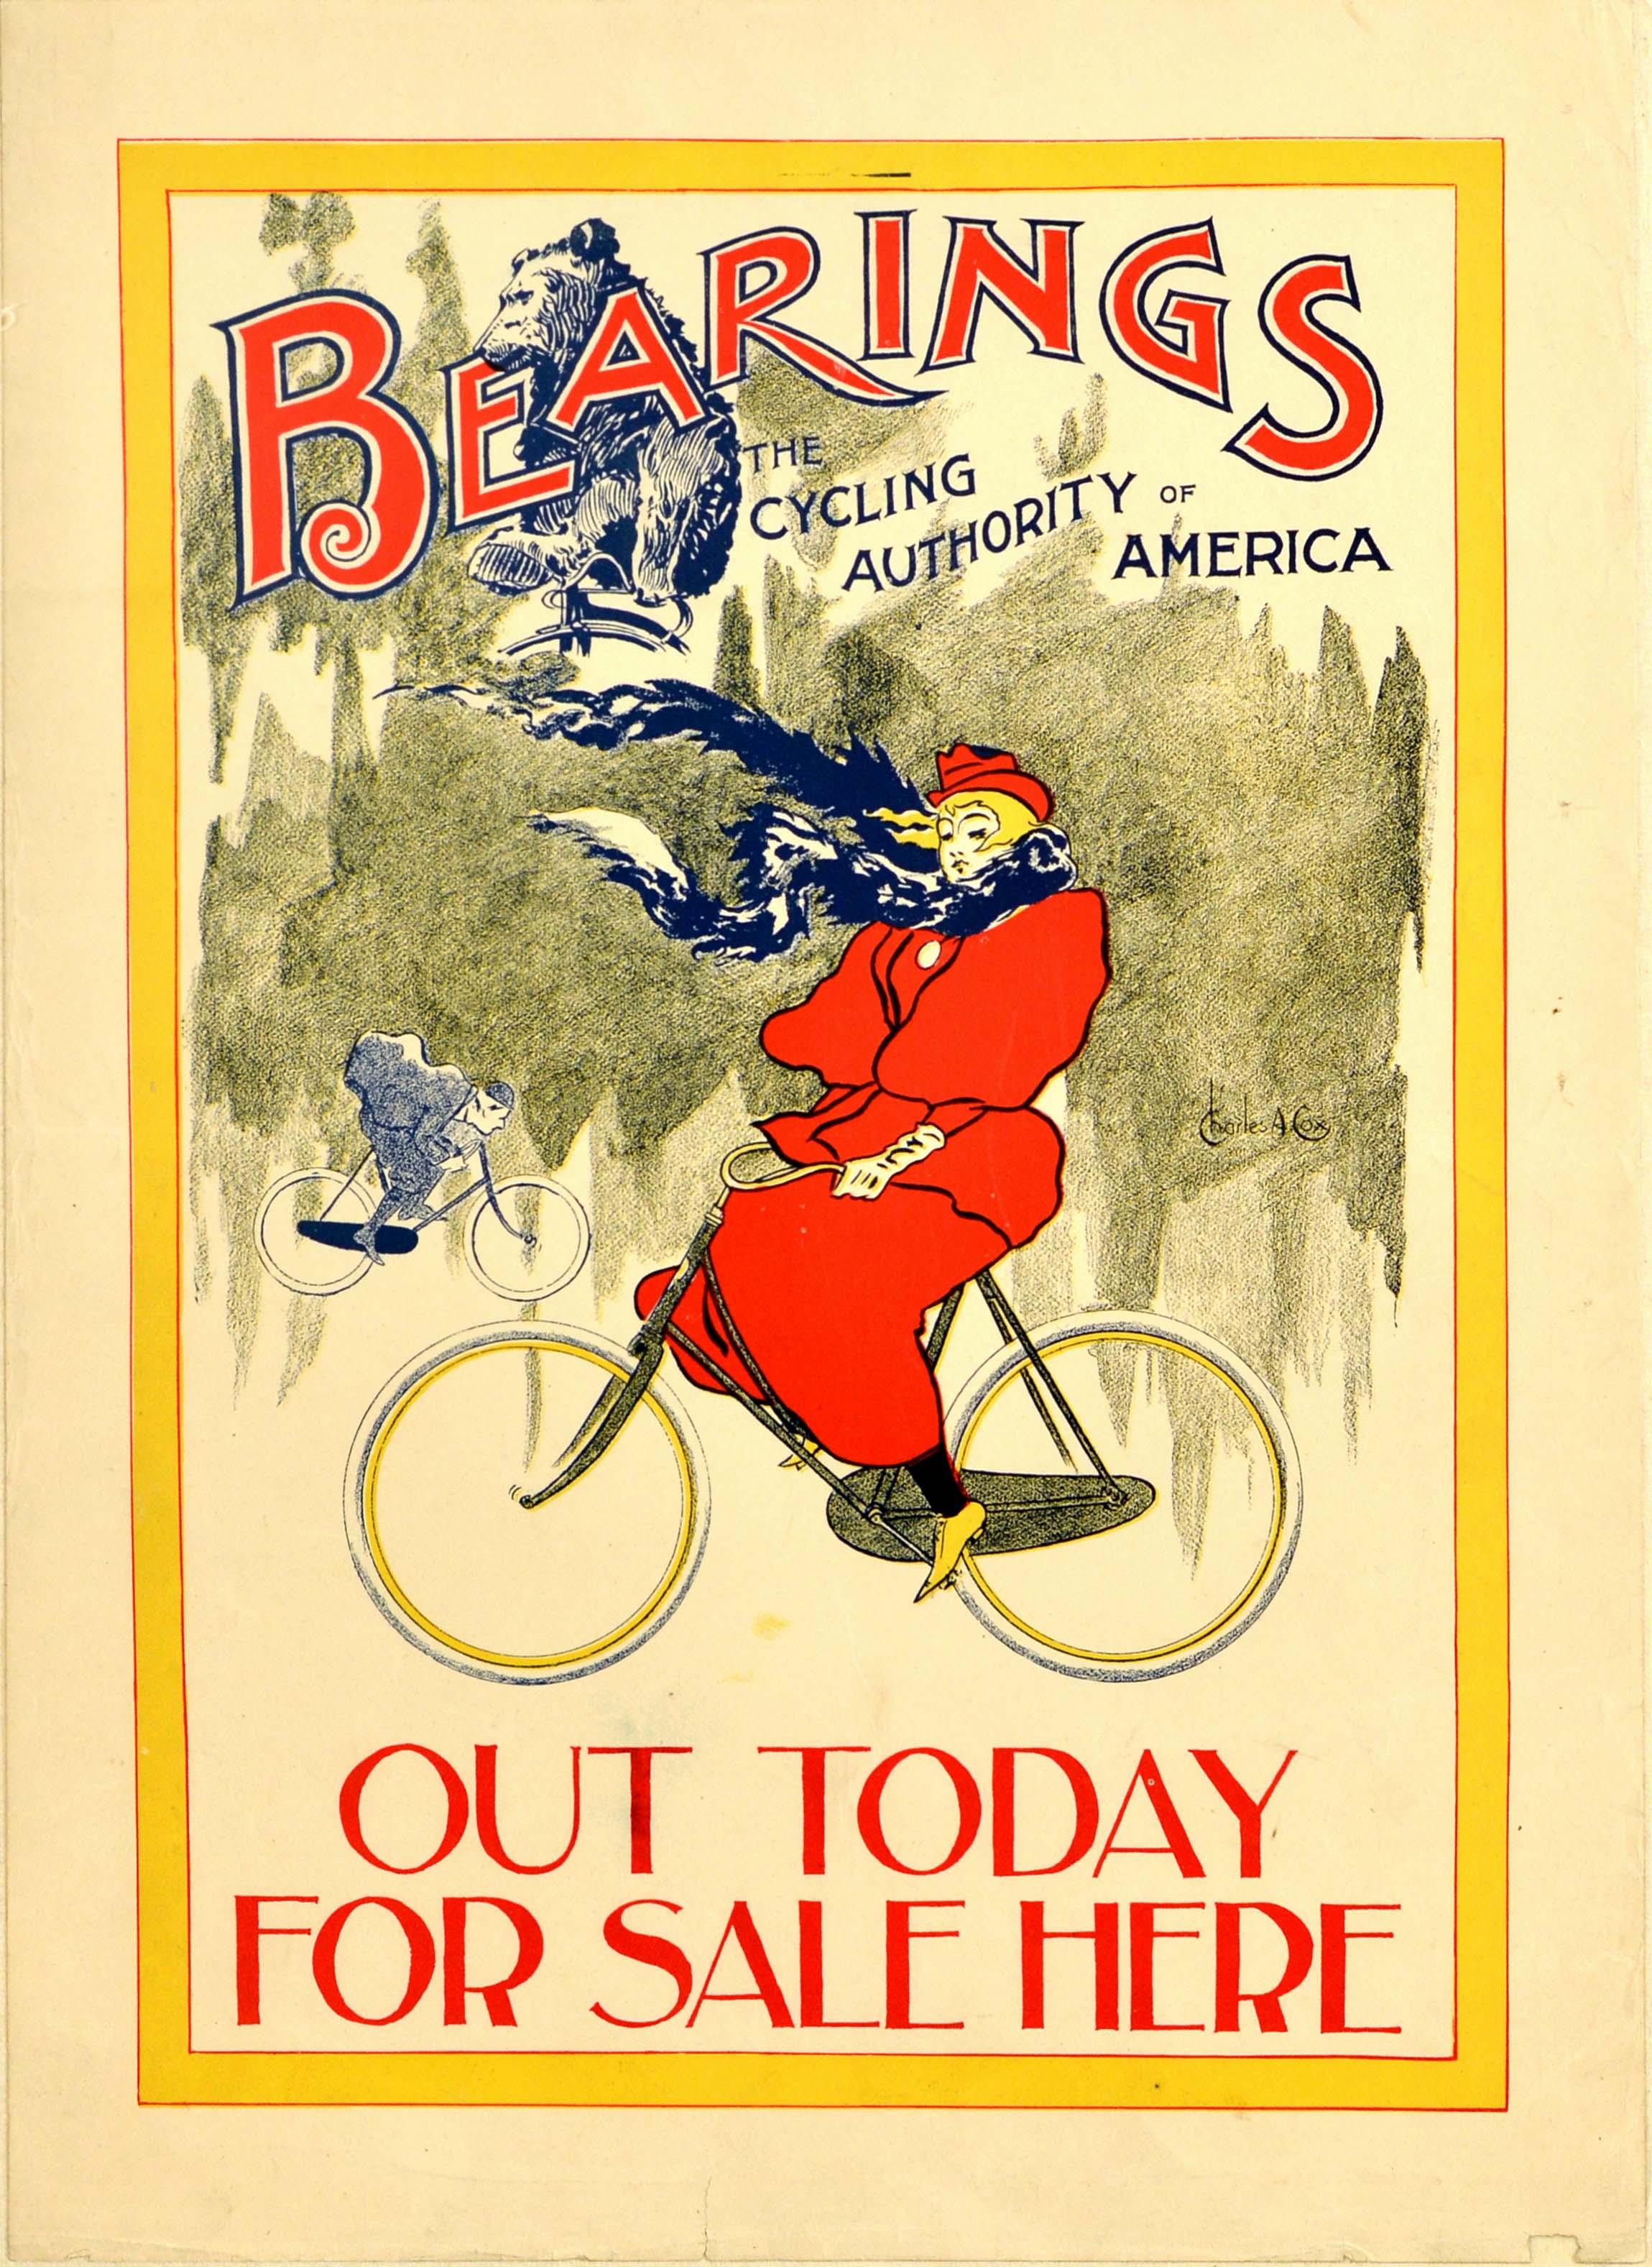 Charles A. Cox Print - Original Antique Poster Bearings The Cycling Authority Of America Magazine Art